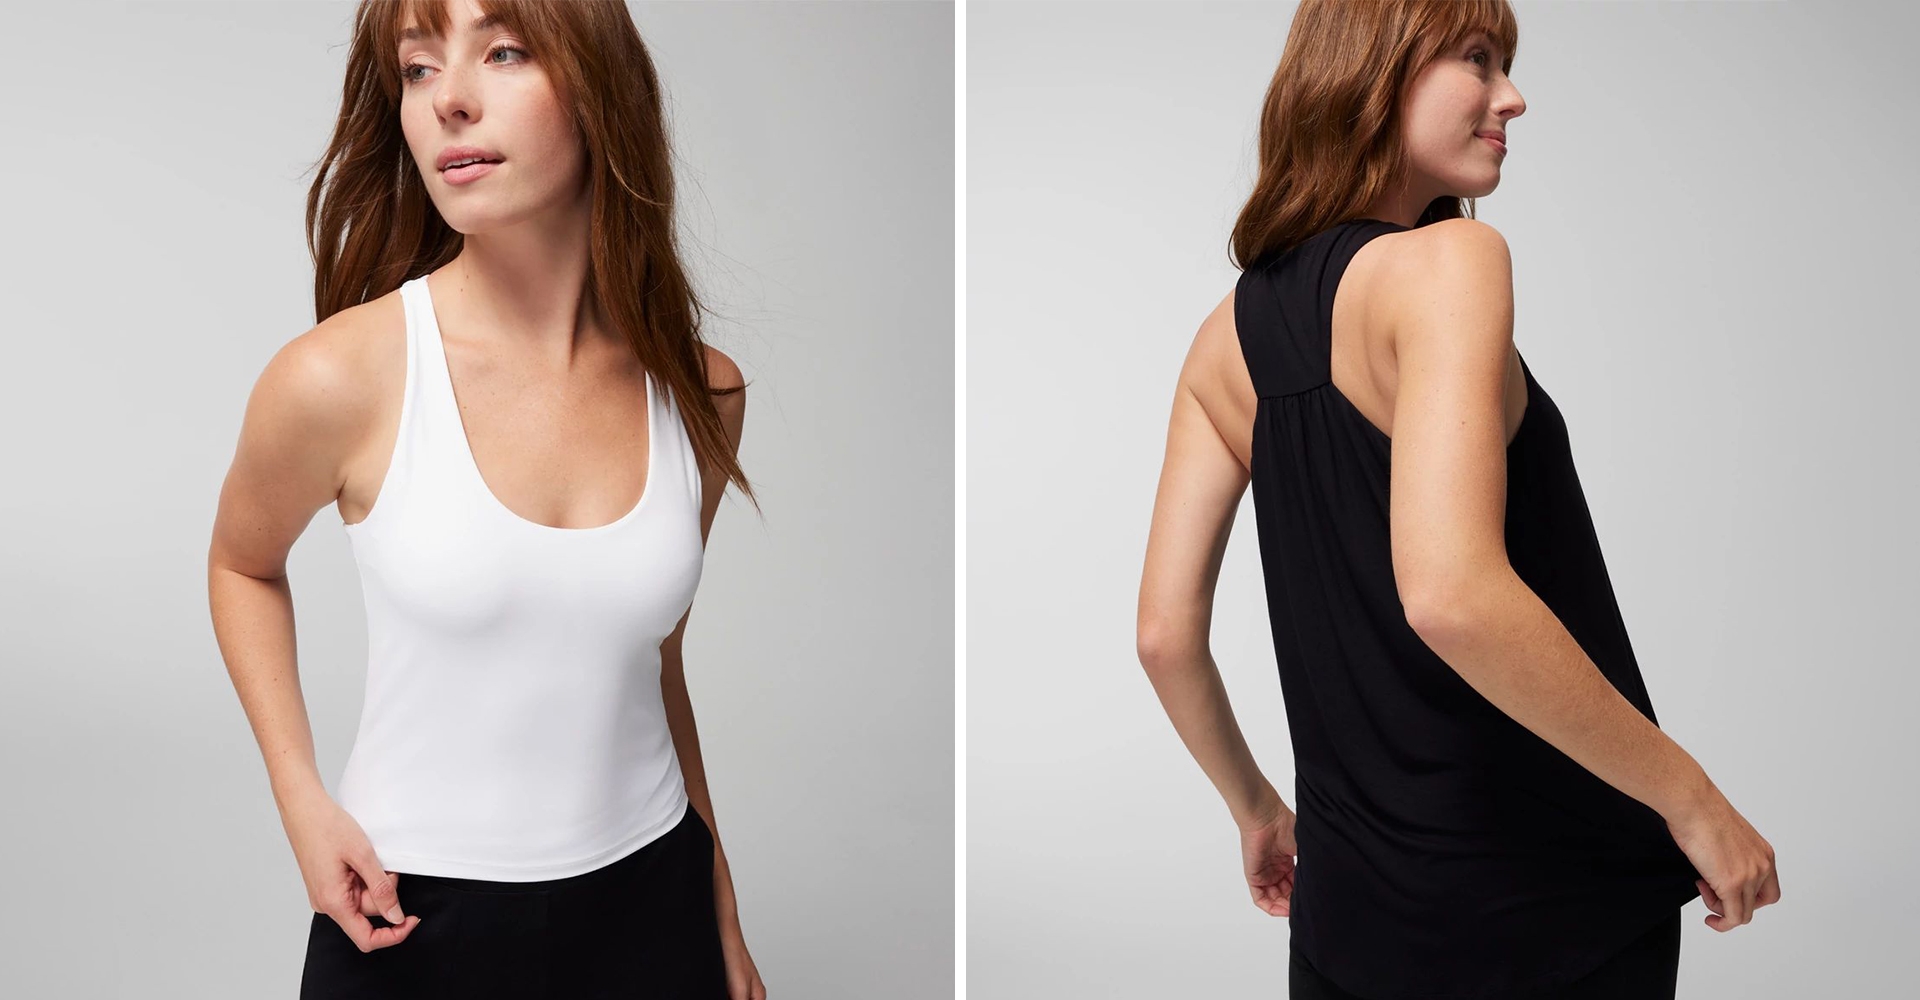 Front image of Soma<sup class=st-superscript>®</sup> model wearing a white tank top. Back image of Soma<sup class=st-superscript>®</sup> model wearing a black racerback tank top.